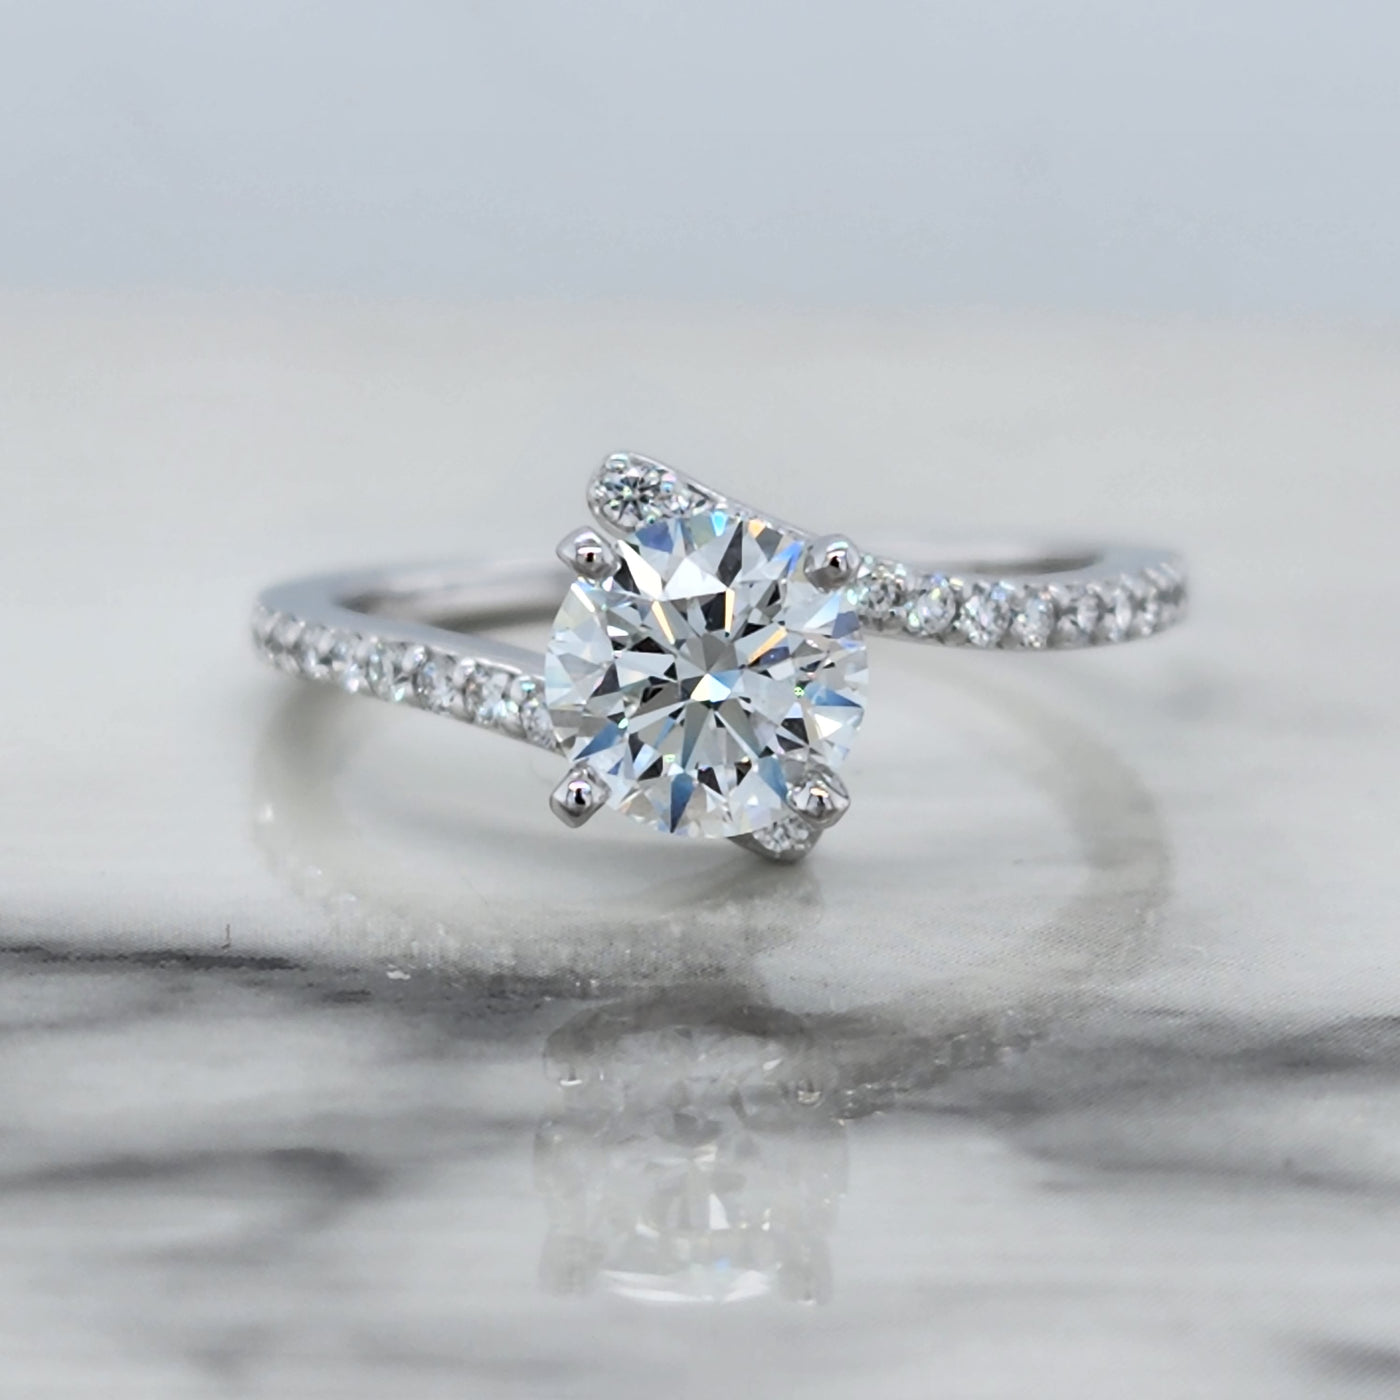 White Gold Bypass Engagement Ring And Wedding Band